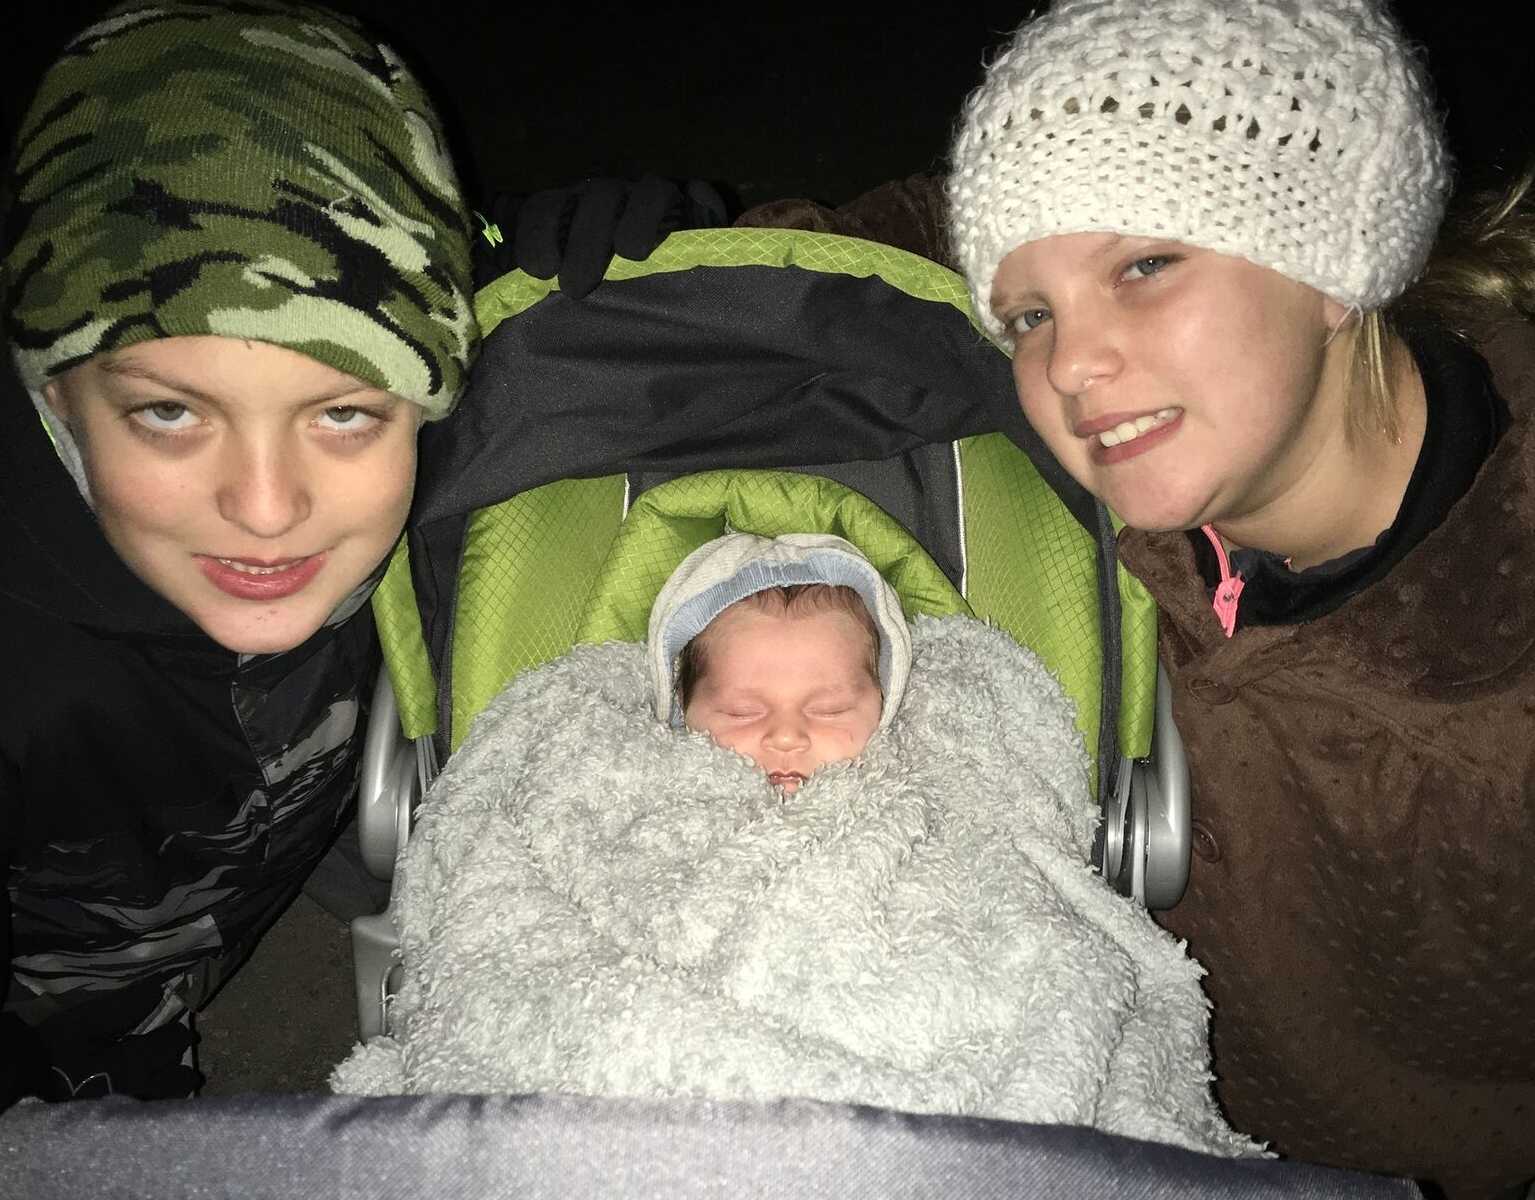 older brother and sister smiling next to adopted baby brother sleeping in a stroller 